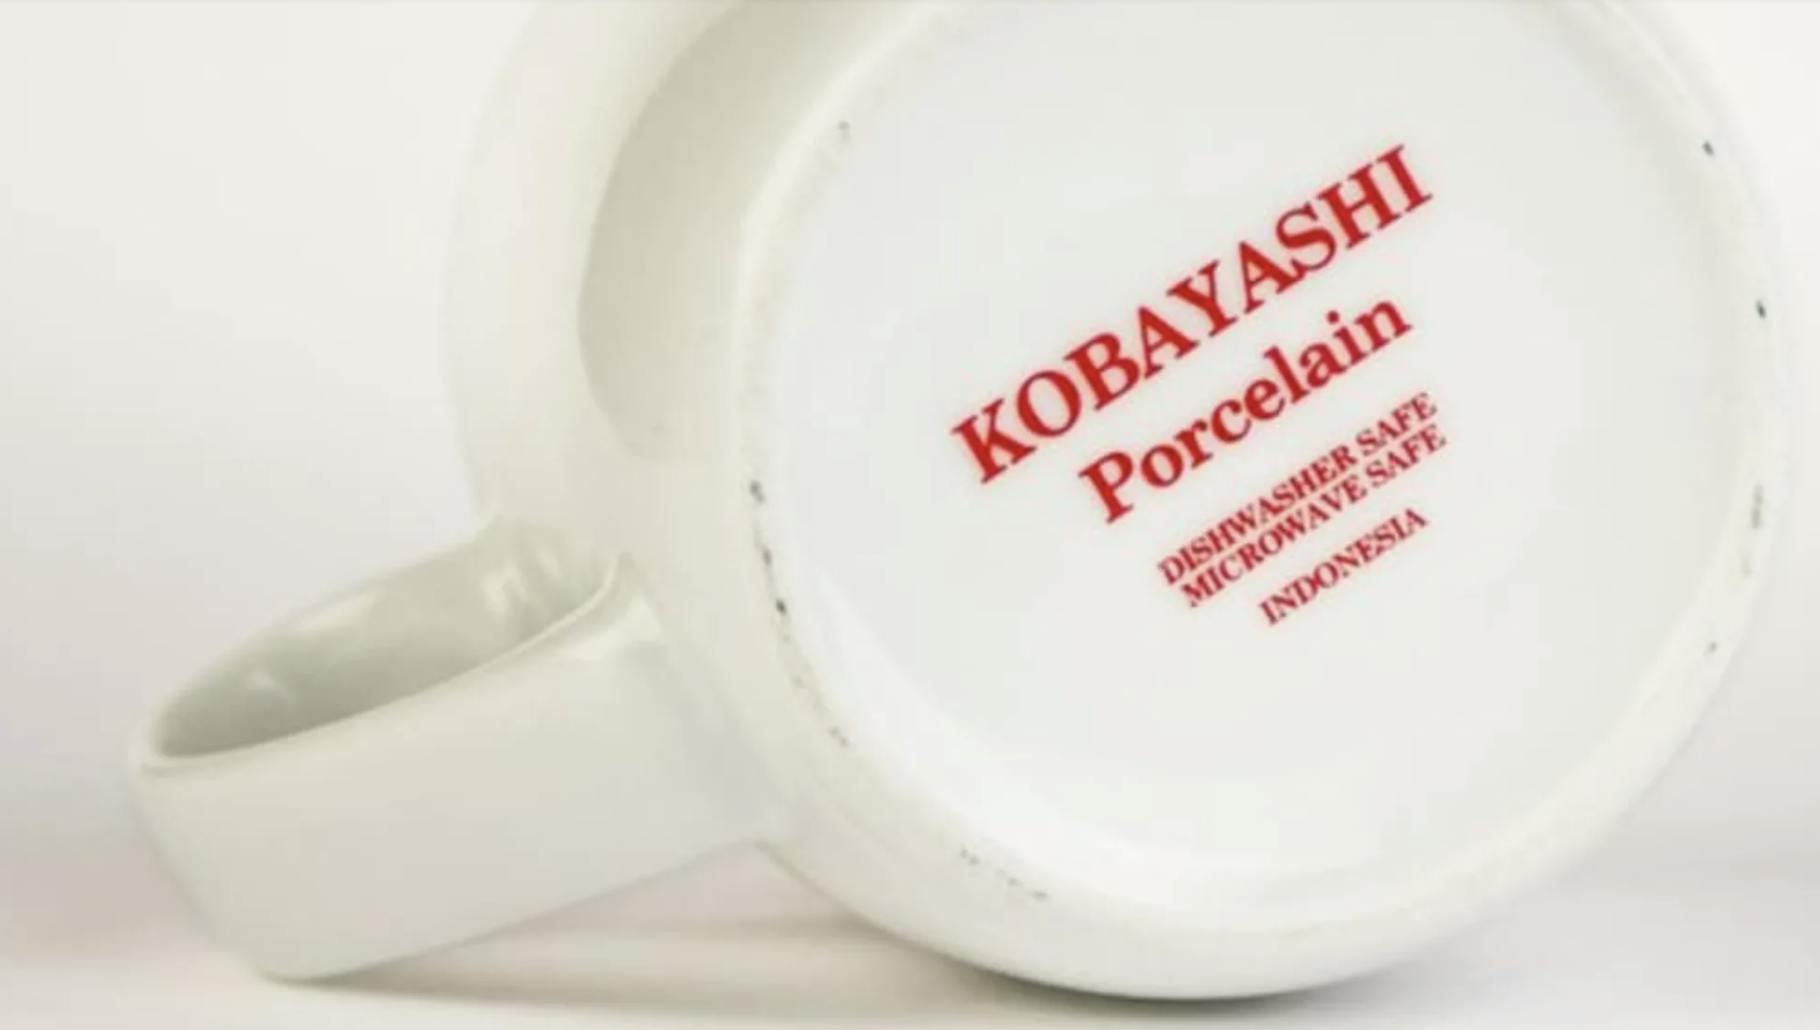 The bottom of a coffee cup, which reads: "Kobayashi Porcelain"